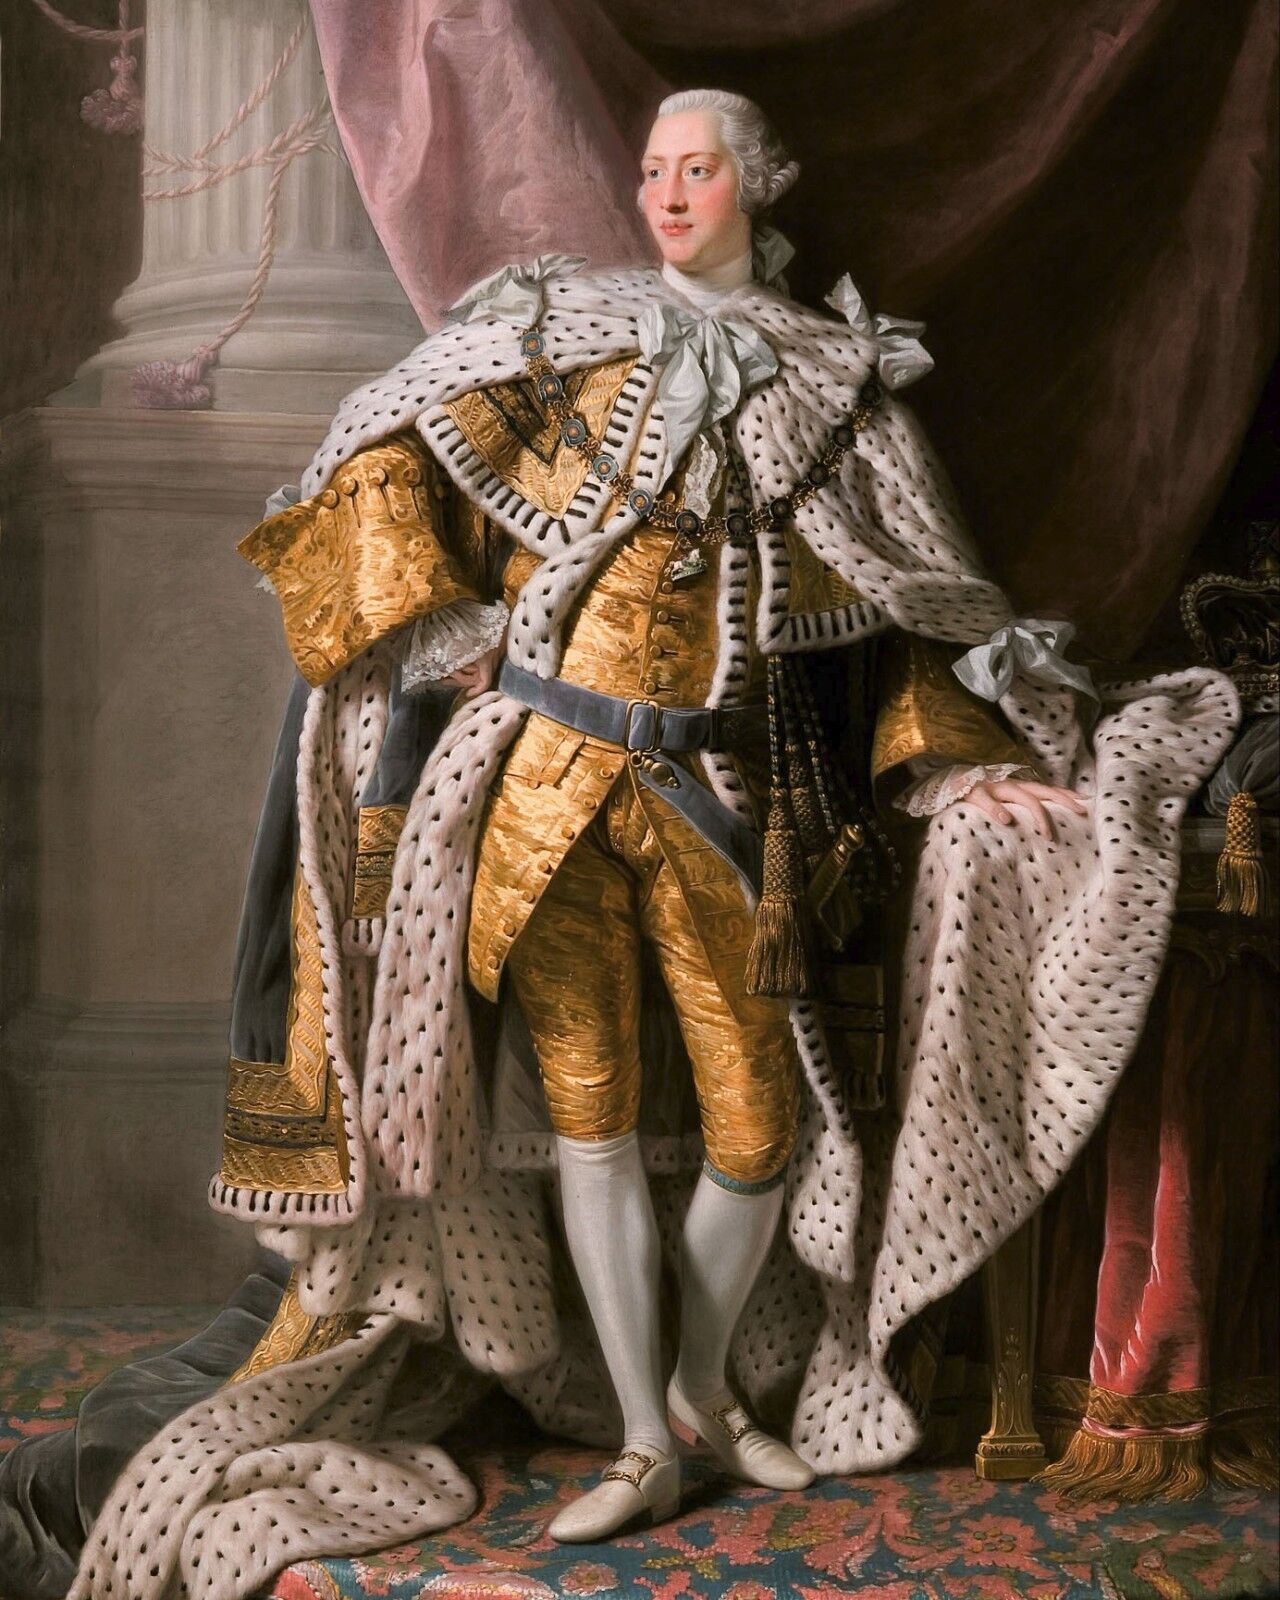 KING GEORGE III OF THE UNITED KINGDOM Glossy 8x10 Photo Great Britain Poster 